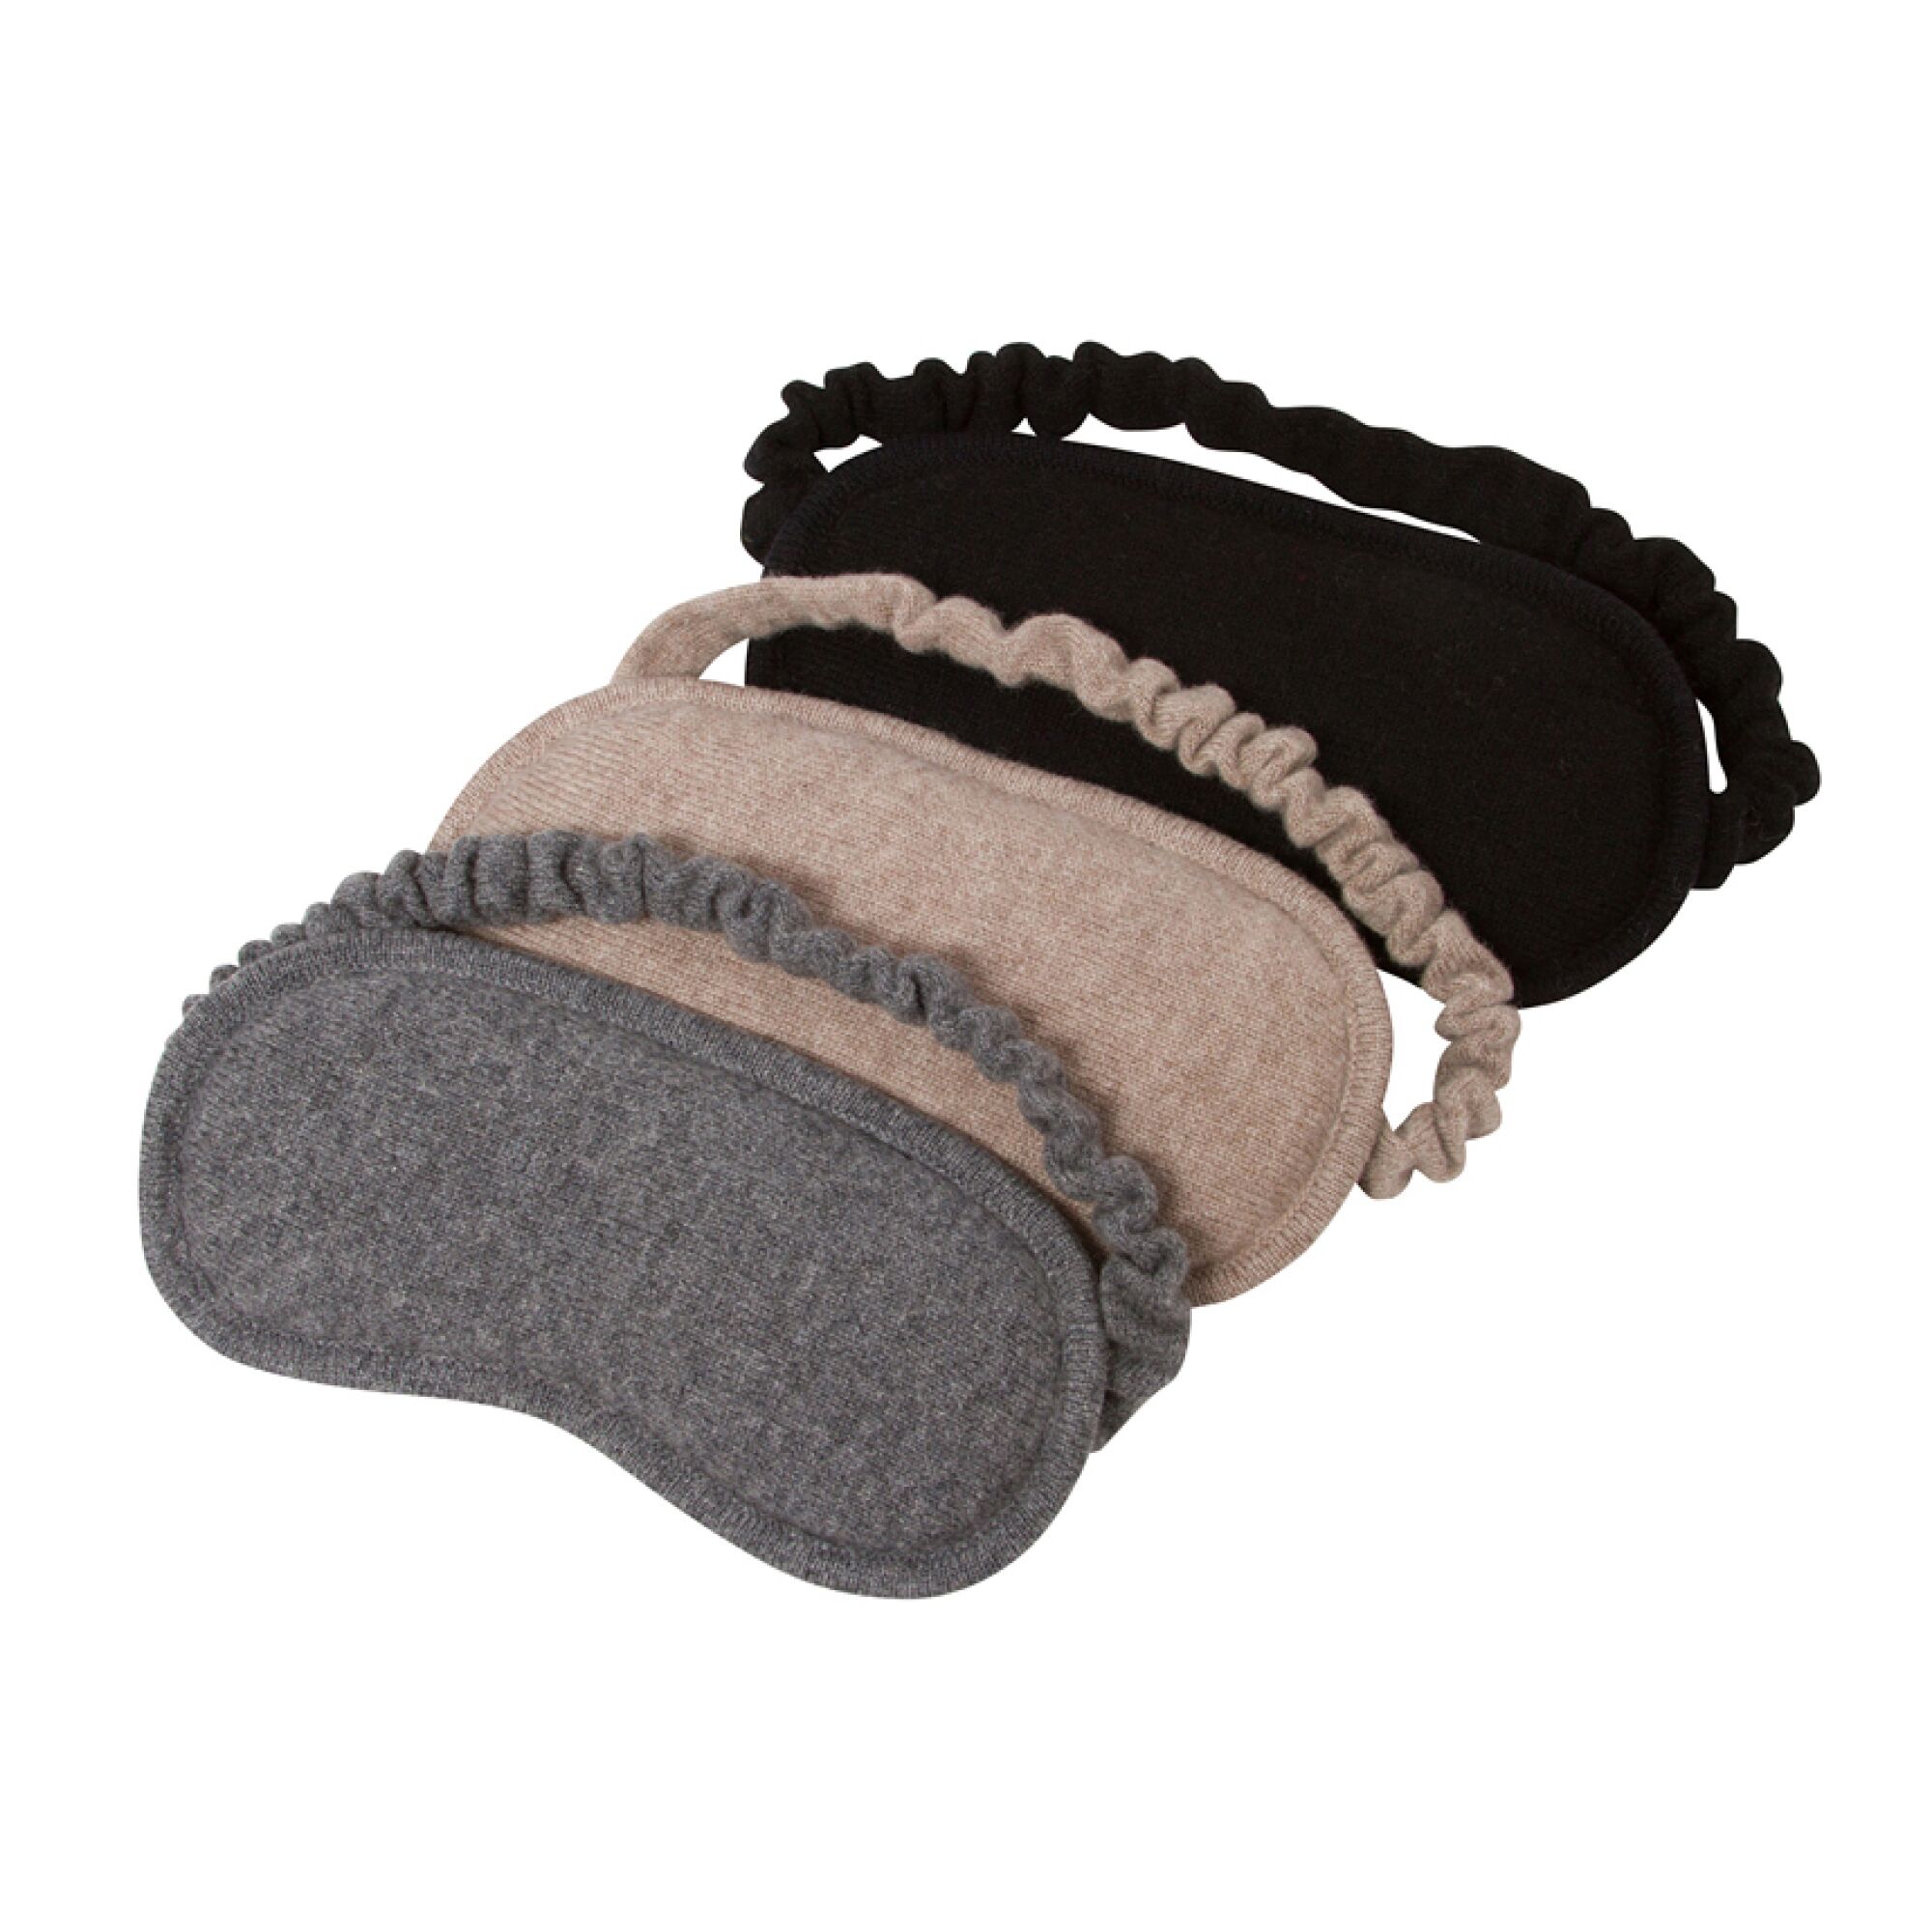 Knitted, pure cashmere eye mask from Naked Cashmere